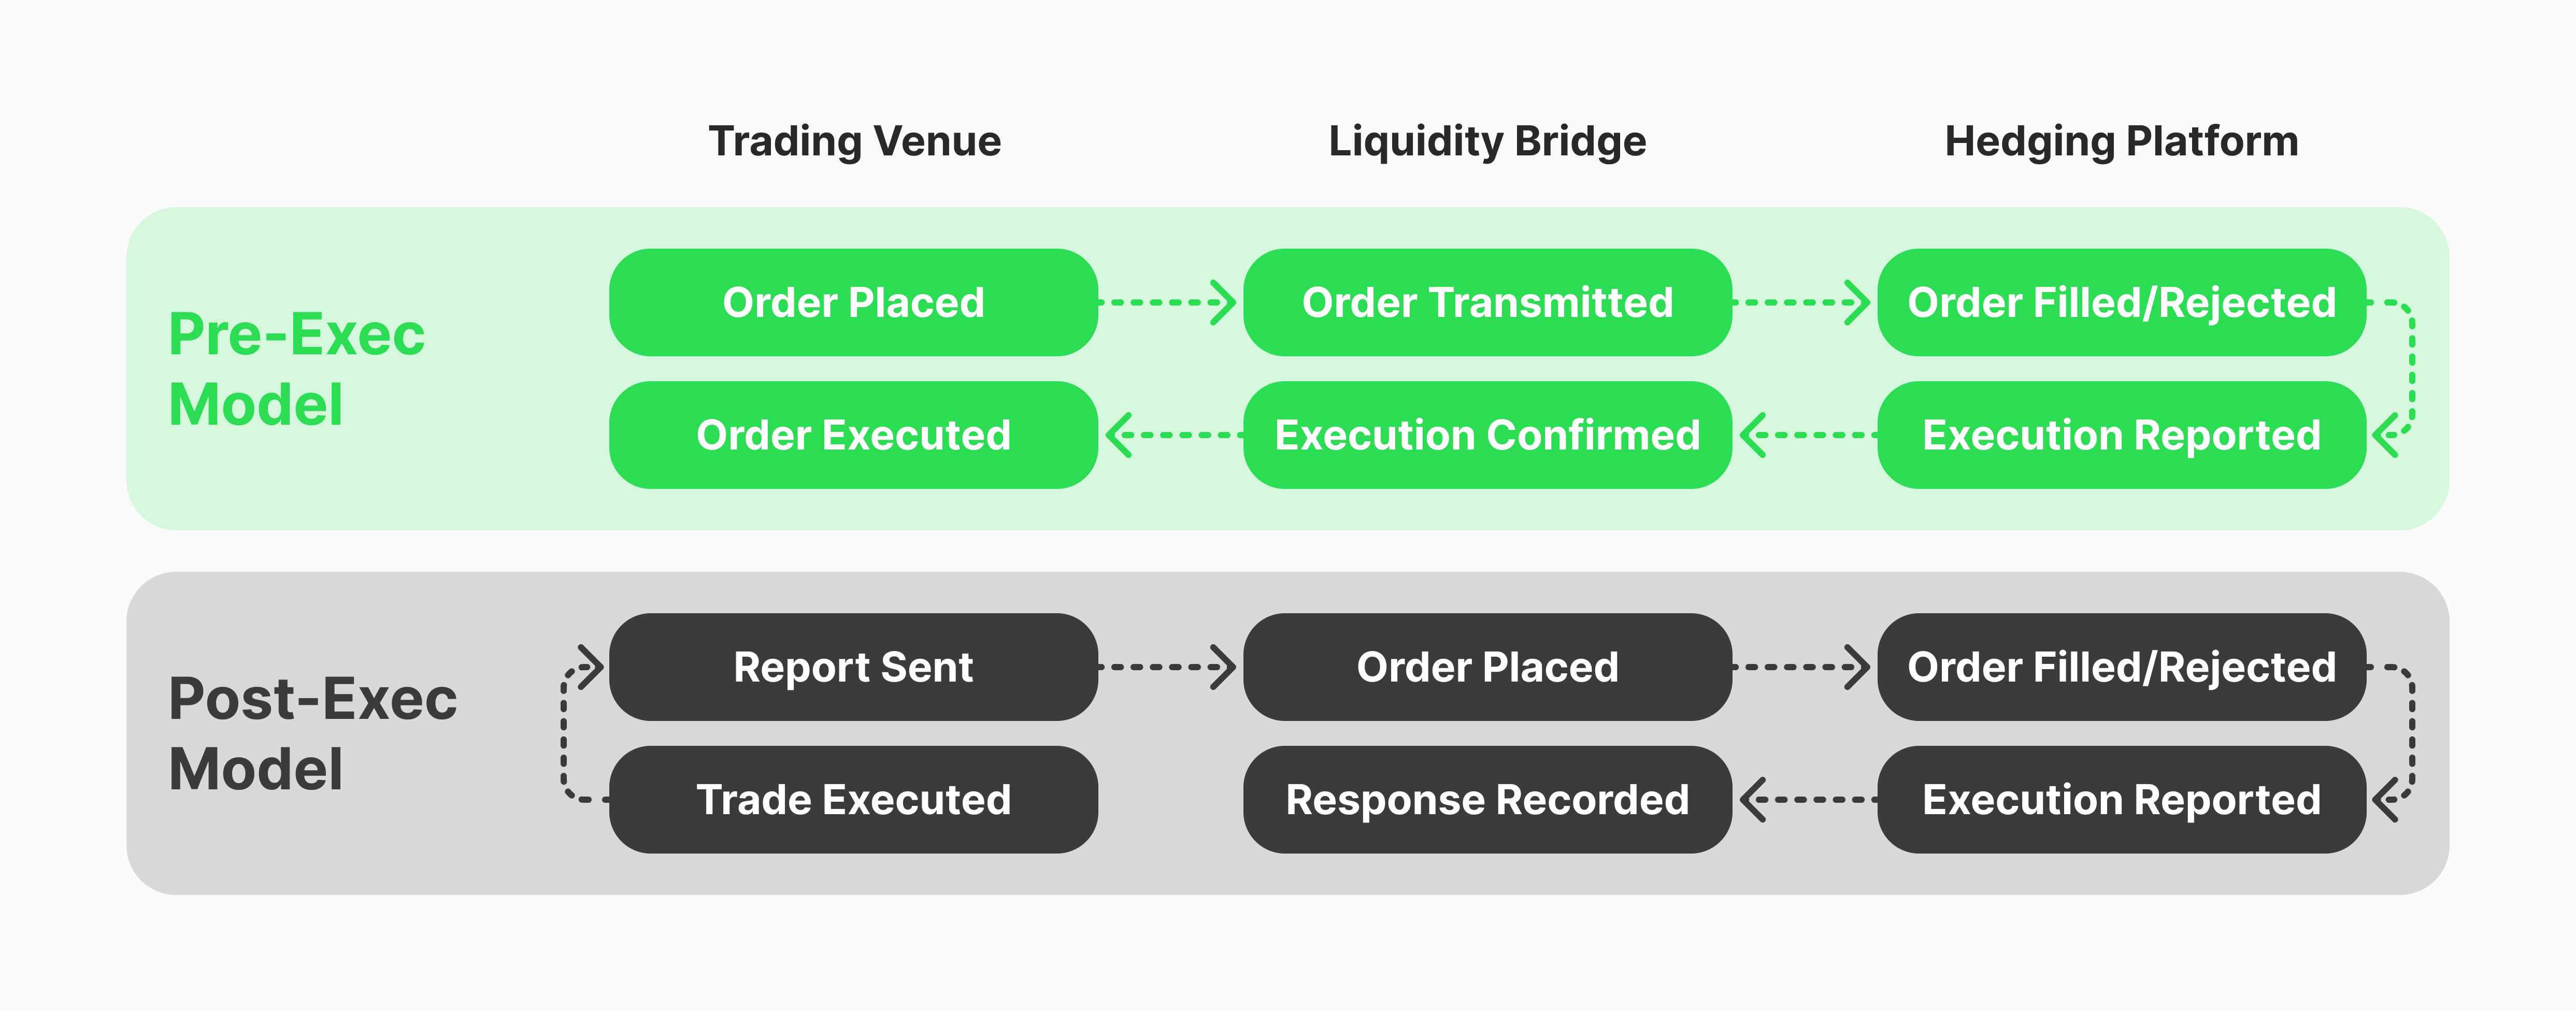 order execution process withing LB